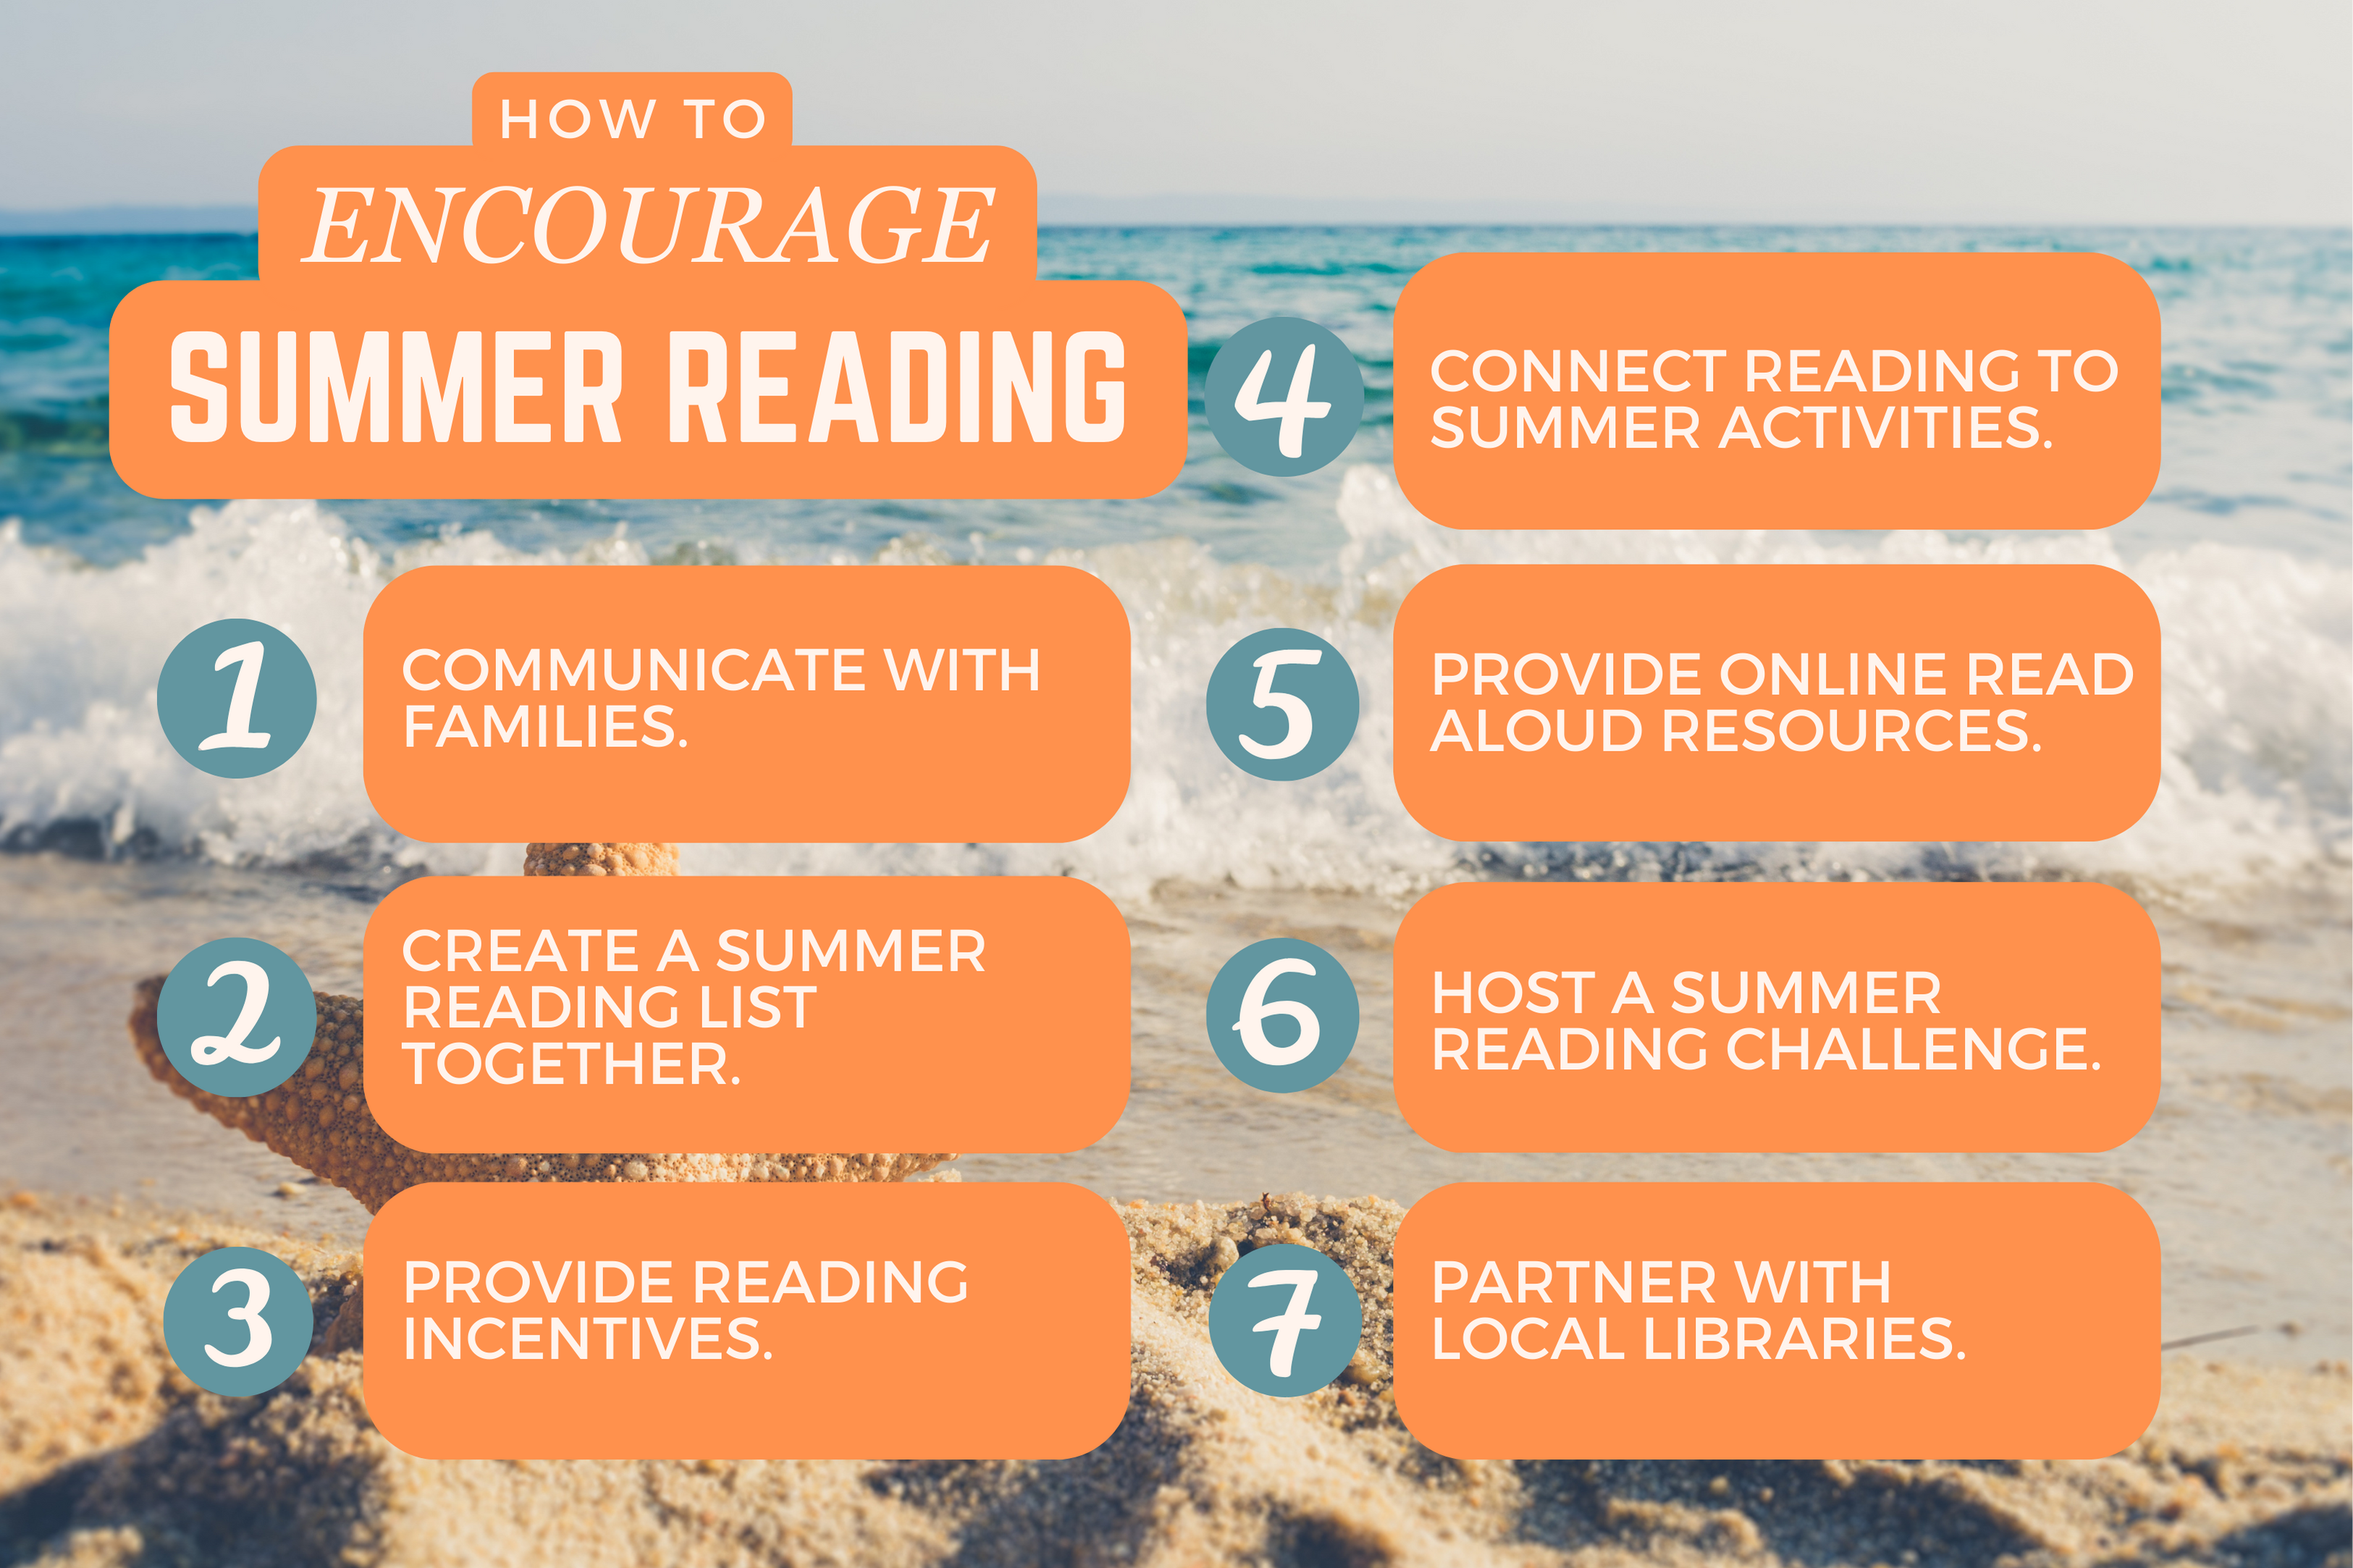 My Books Summer: Give Students' Summer Reading a Boost